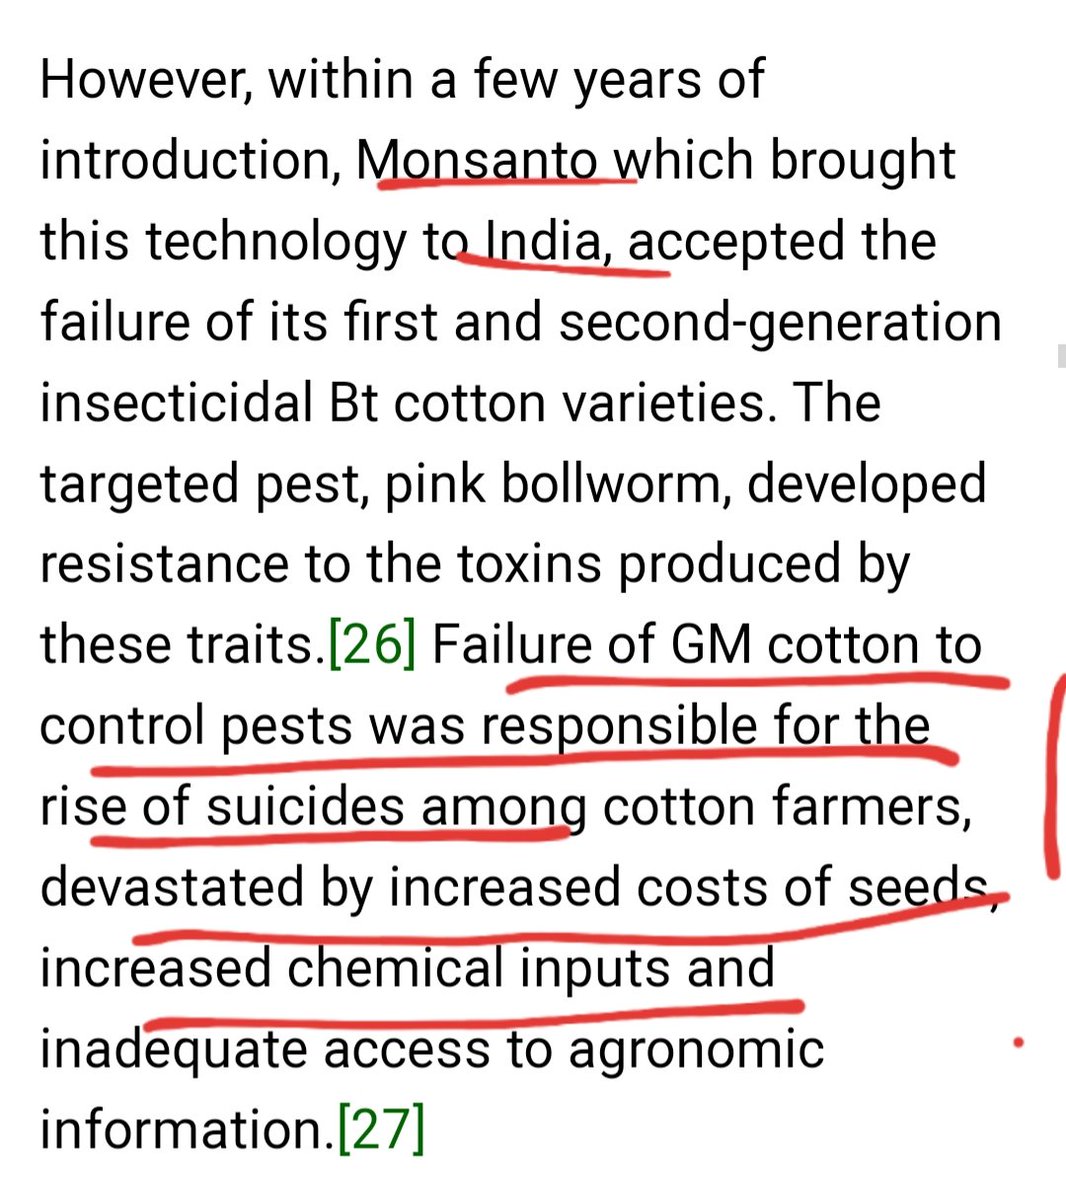 @debarlinea why do we always argue on basis of citing the USA as a benchmark on issues eg GMO? Why not to contexts similar to ours in the Global South? Eg India/Asia? @KTNNewsKE